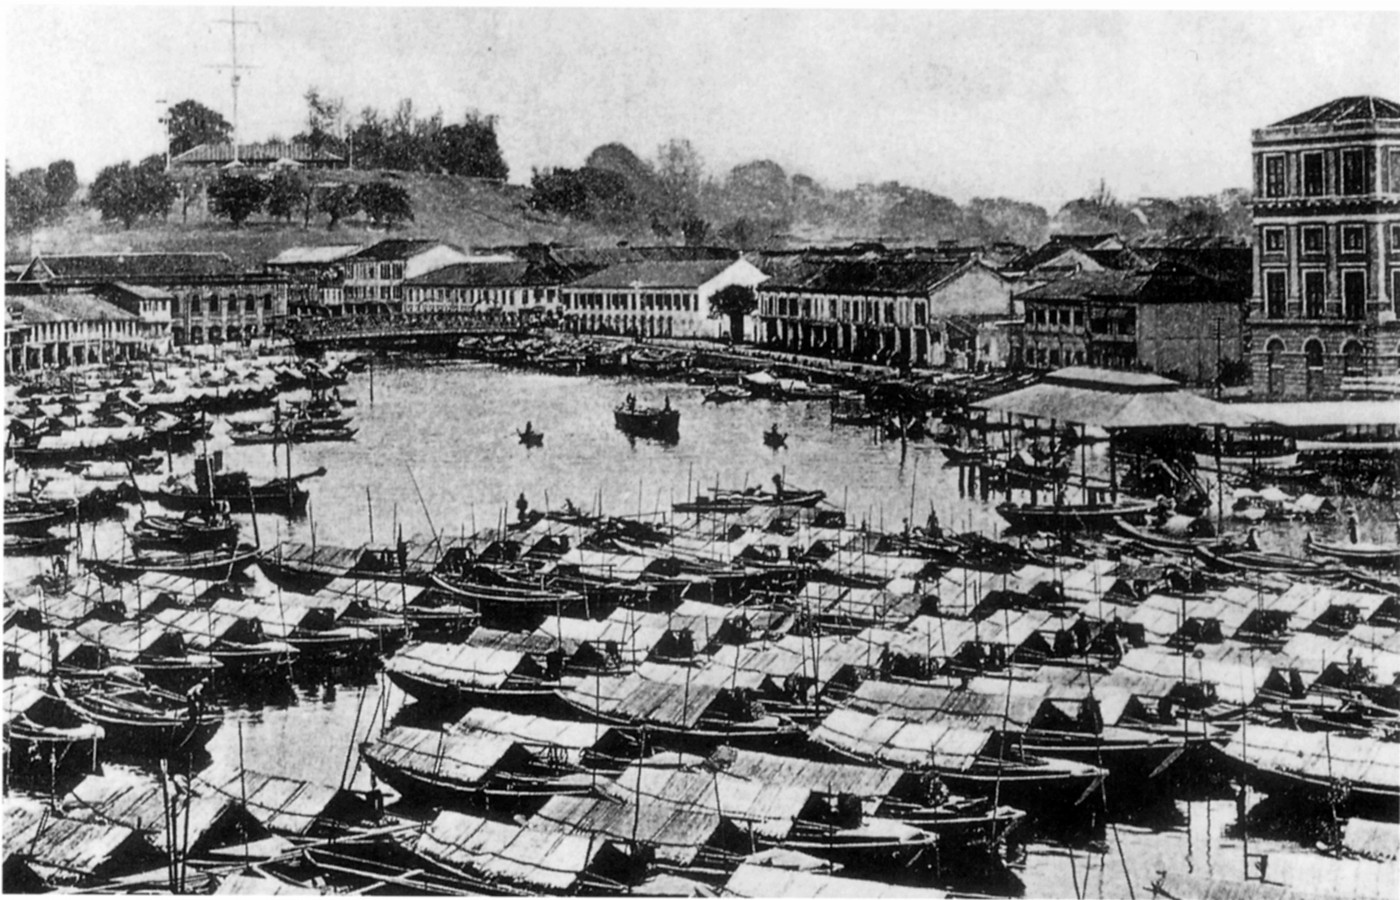 The view from Lloyd’s Register’s Singapore office in 1895